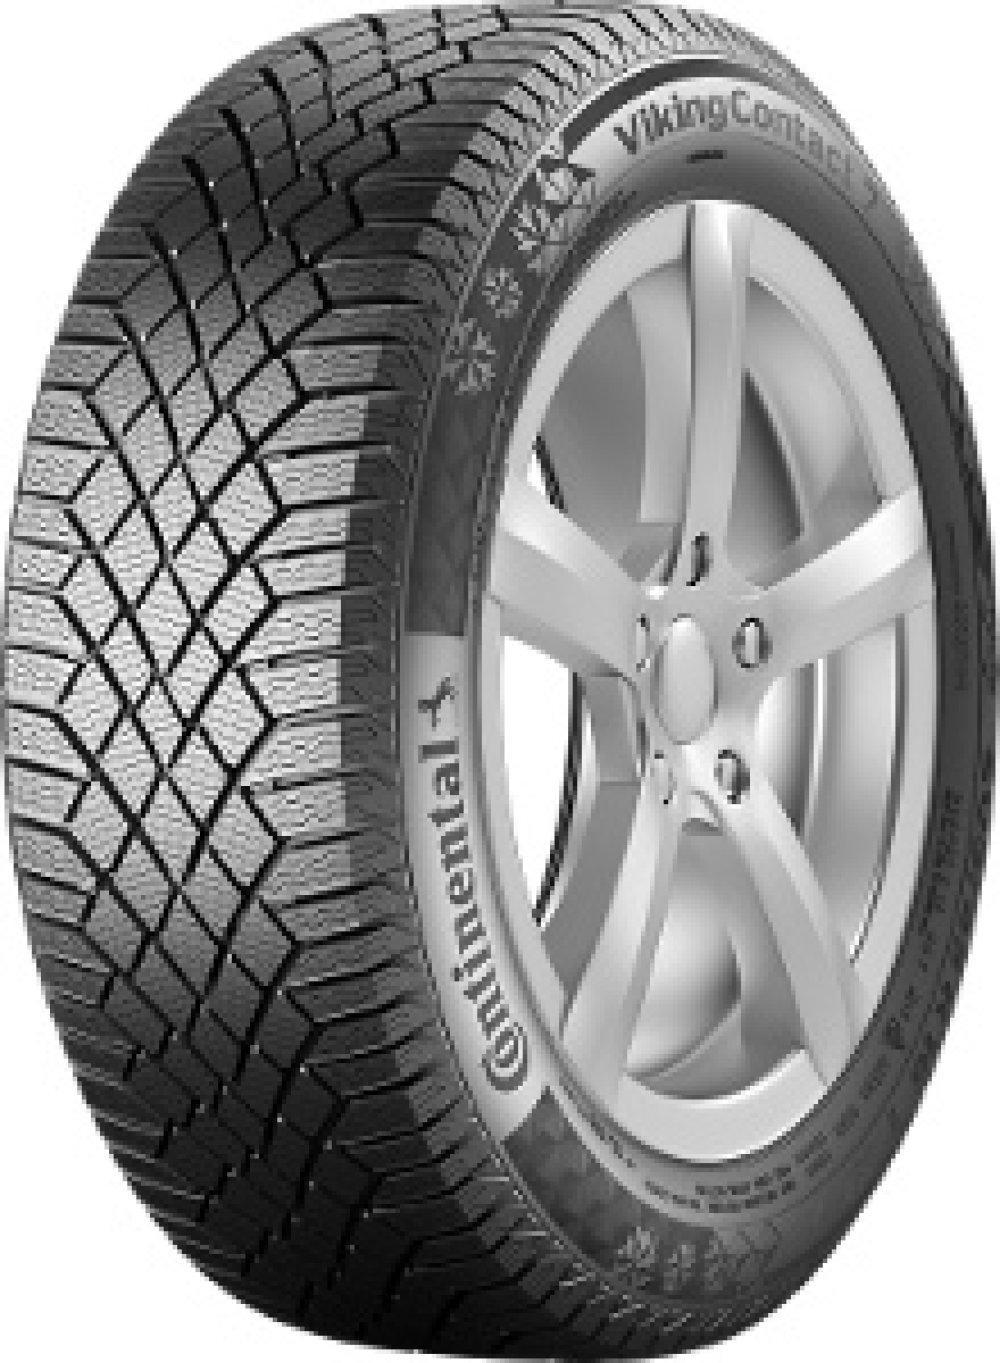 Continental Viking Contact 7 ( 215/50 R19 93T, Nordic compound ) von Continental